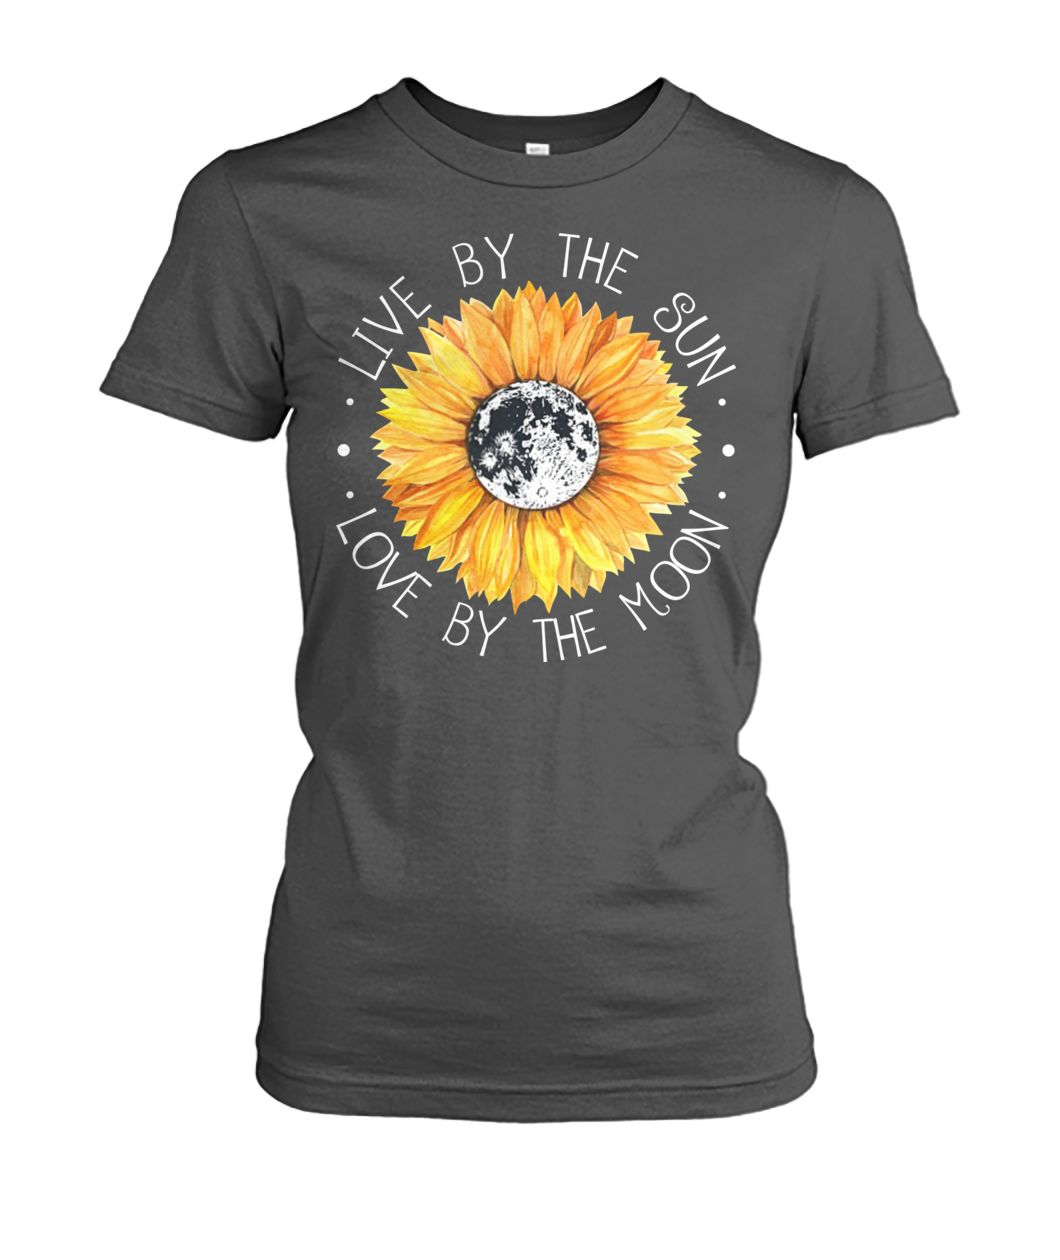 Hippie sunflower live by the sun love by the moon women's crew tee